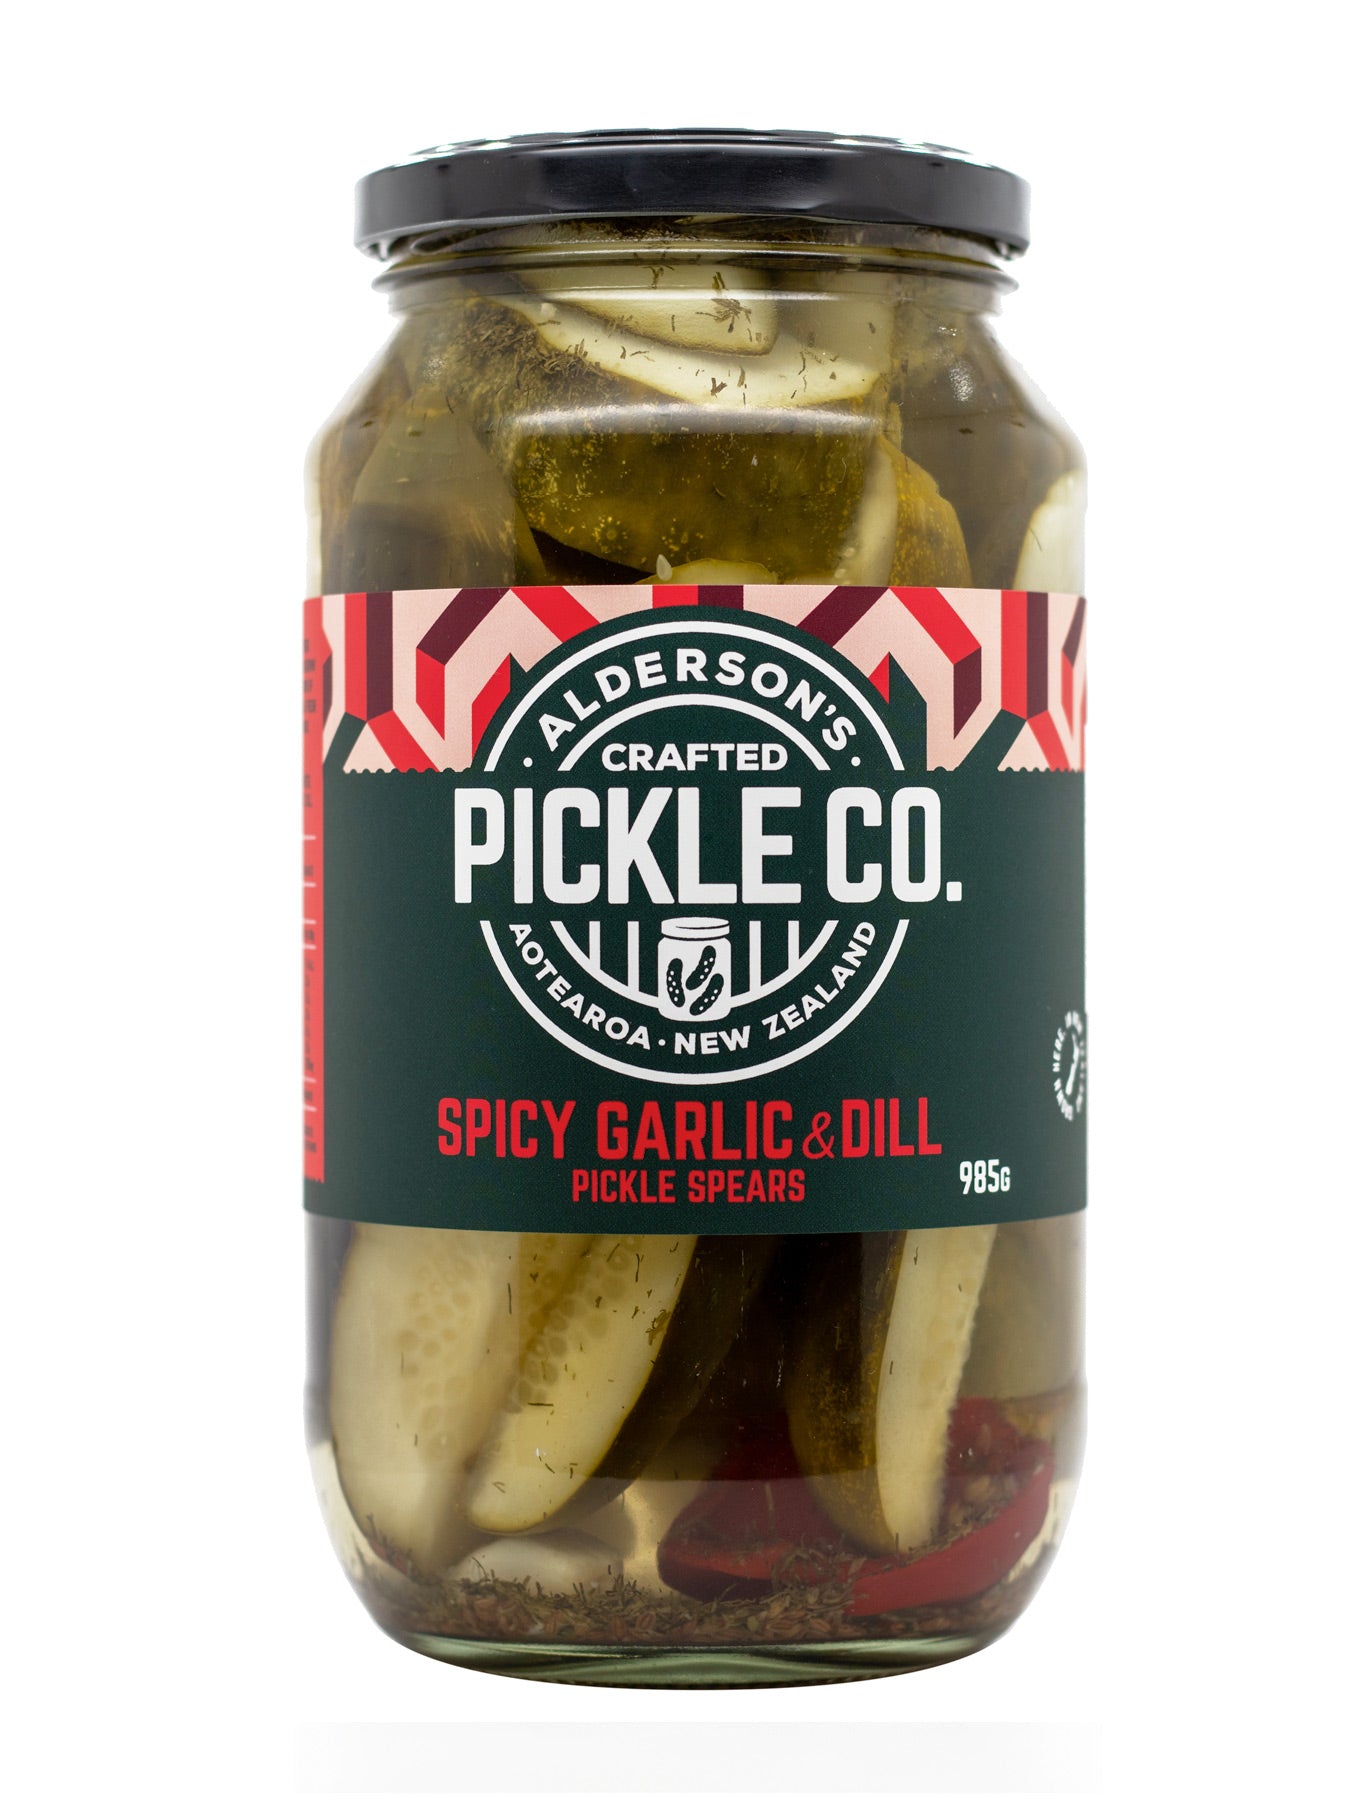 Spicy Garlic & Dill Pickled Spears